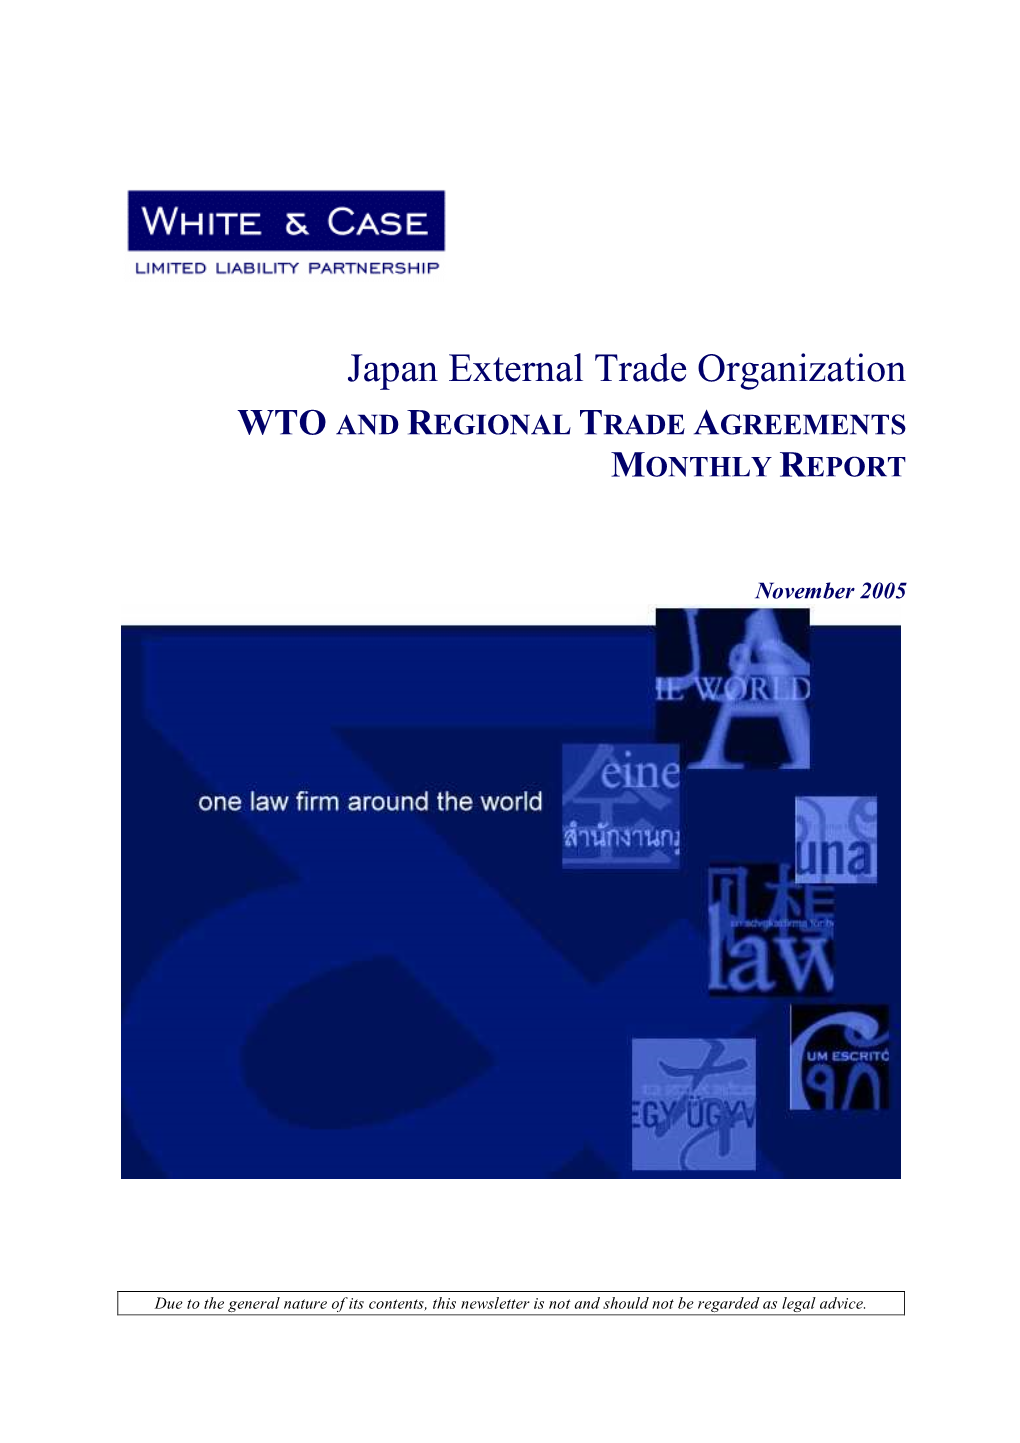 Japan External Trade Organization WTO and REGIONAL TRADE AGREEMENTS MONTHLY REPORT